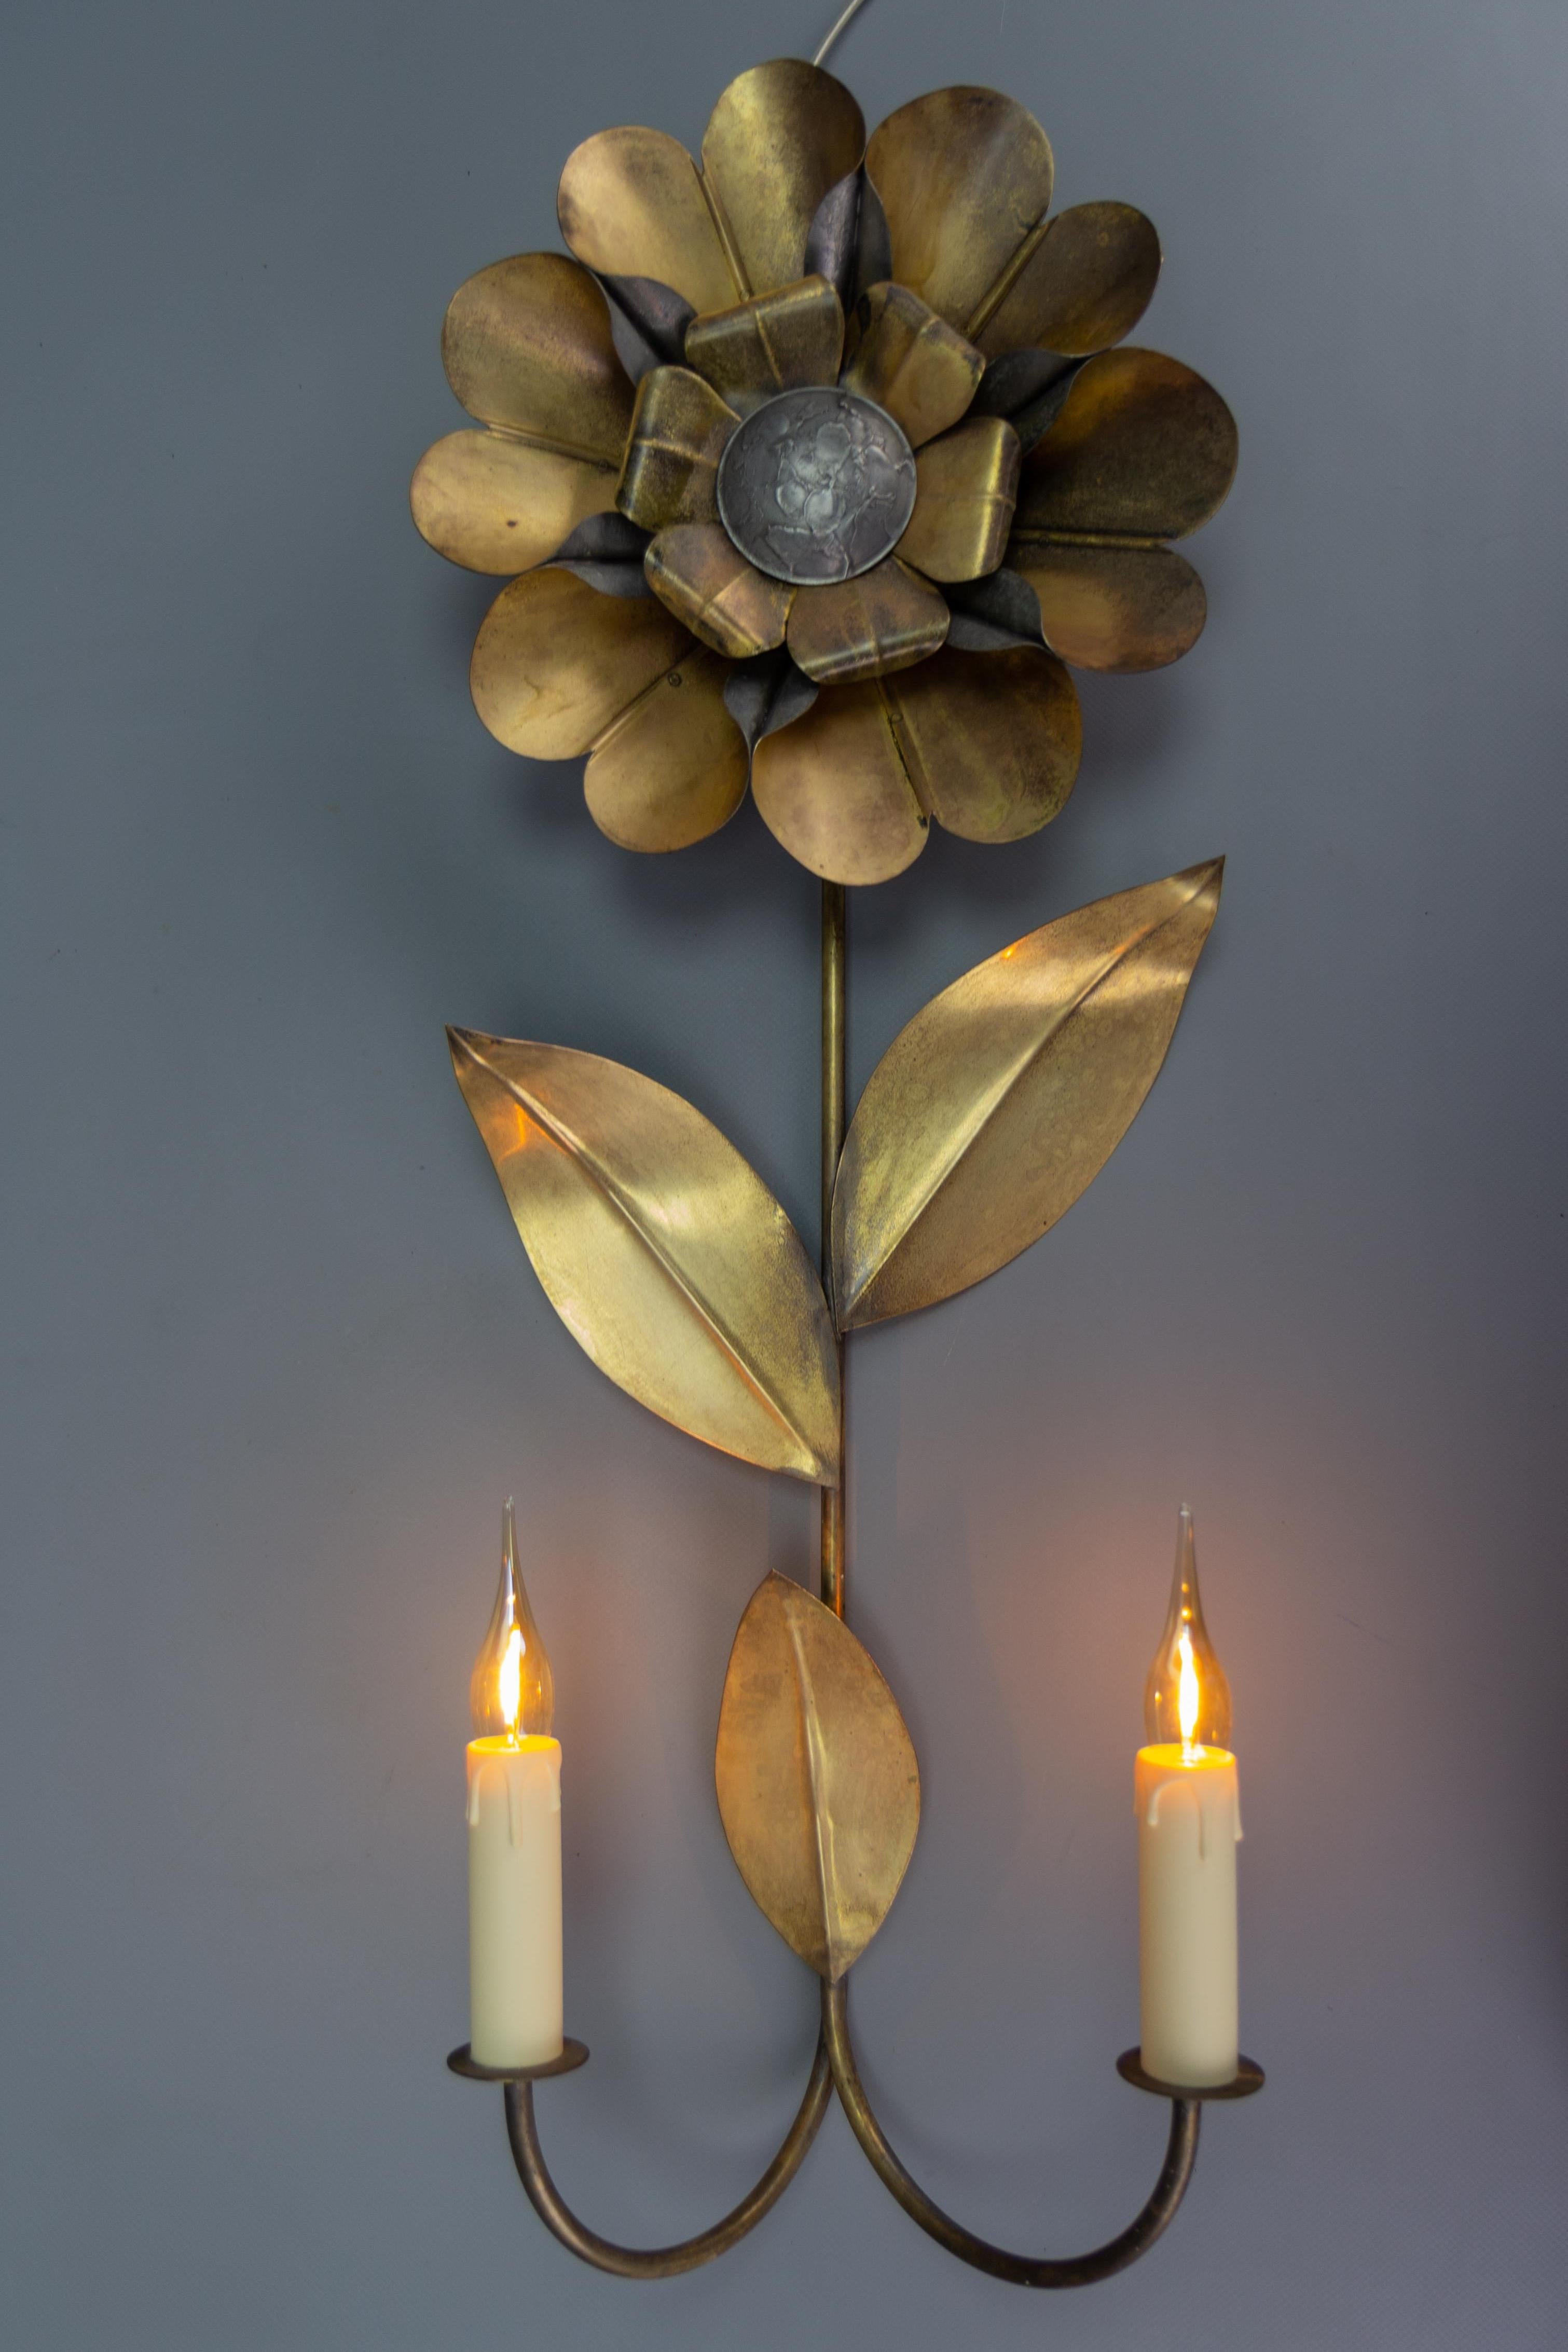 Mid-Century Modern brass and metal flower-shaped twin arm sconce, France, 1950s.
This beautiful Mid-Century Modern wall lamp features a flower- or daisy-shaped brass and metal body with twin arms, each with a socket for E14-size light